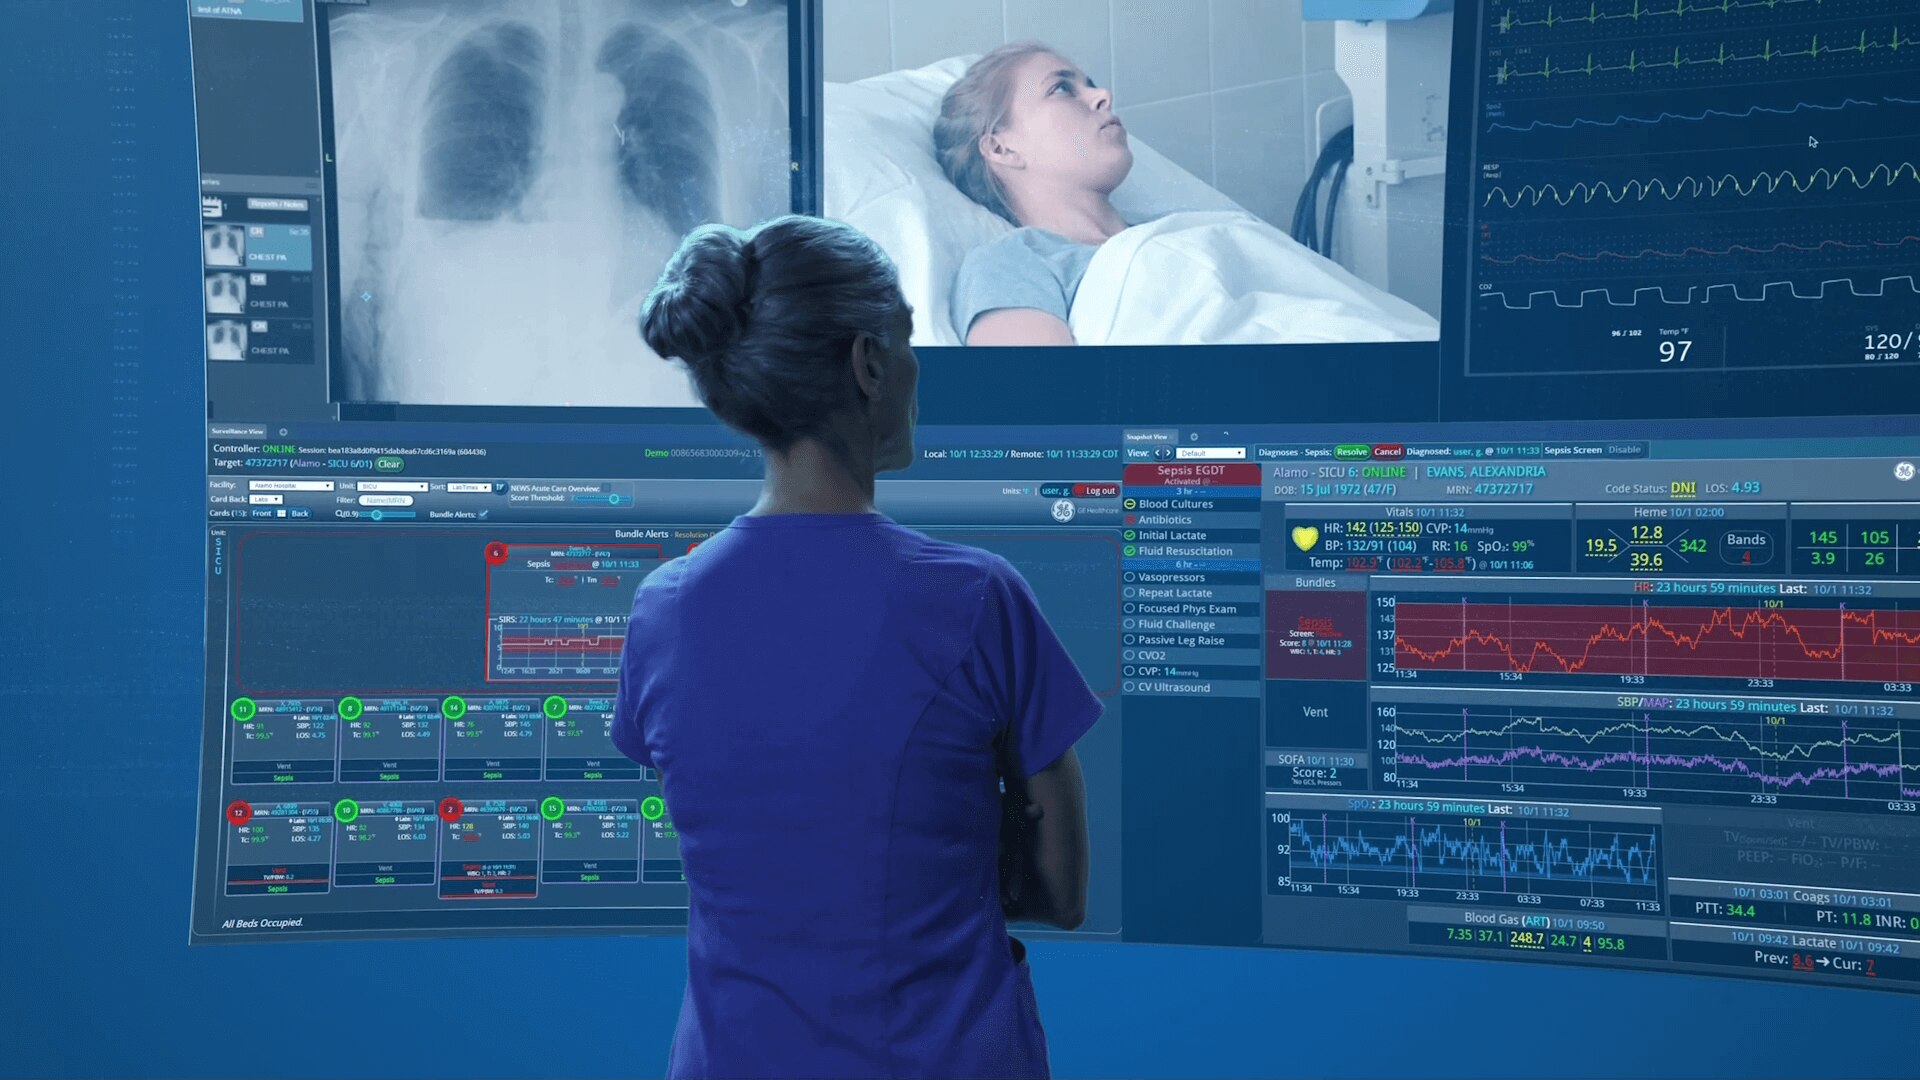 GE Healthcare Systems | GE Healthcare (United States)